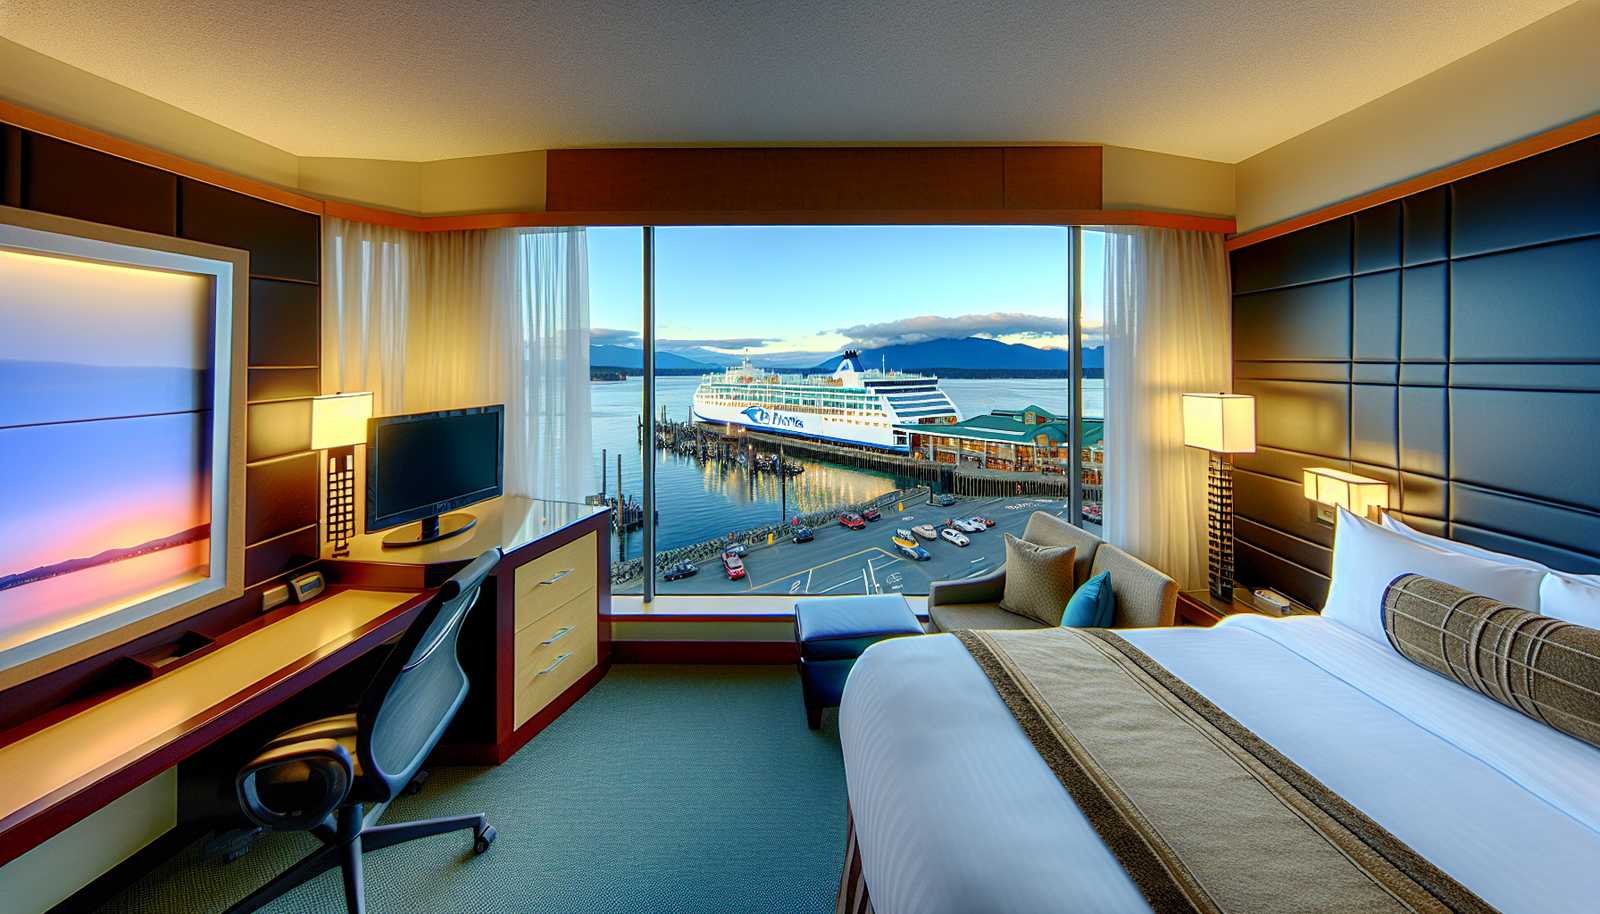 A cozy hotel room with a view of the BC Ferries terminal in Departure Bay, Vancouver Island